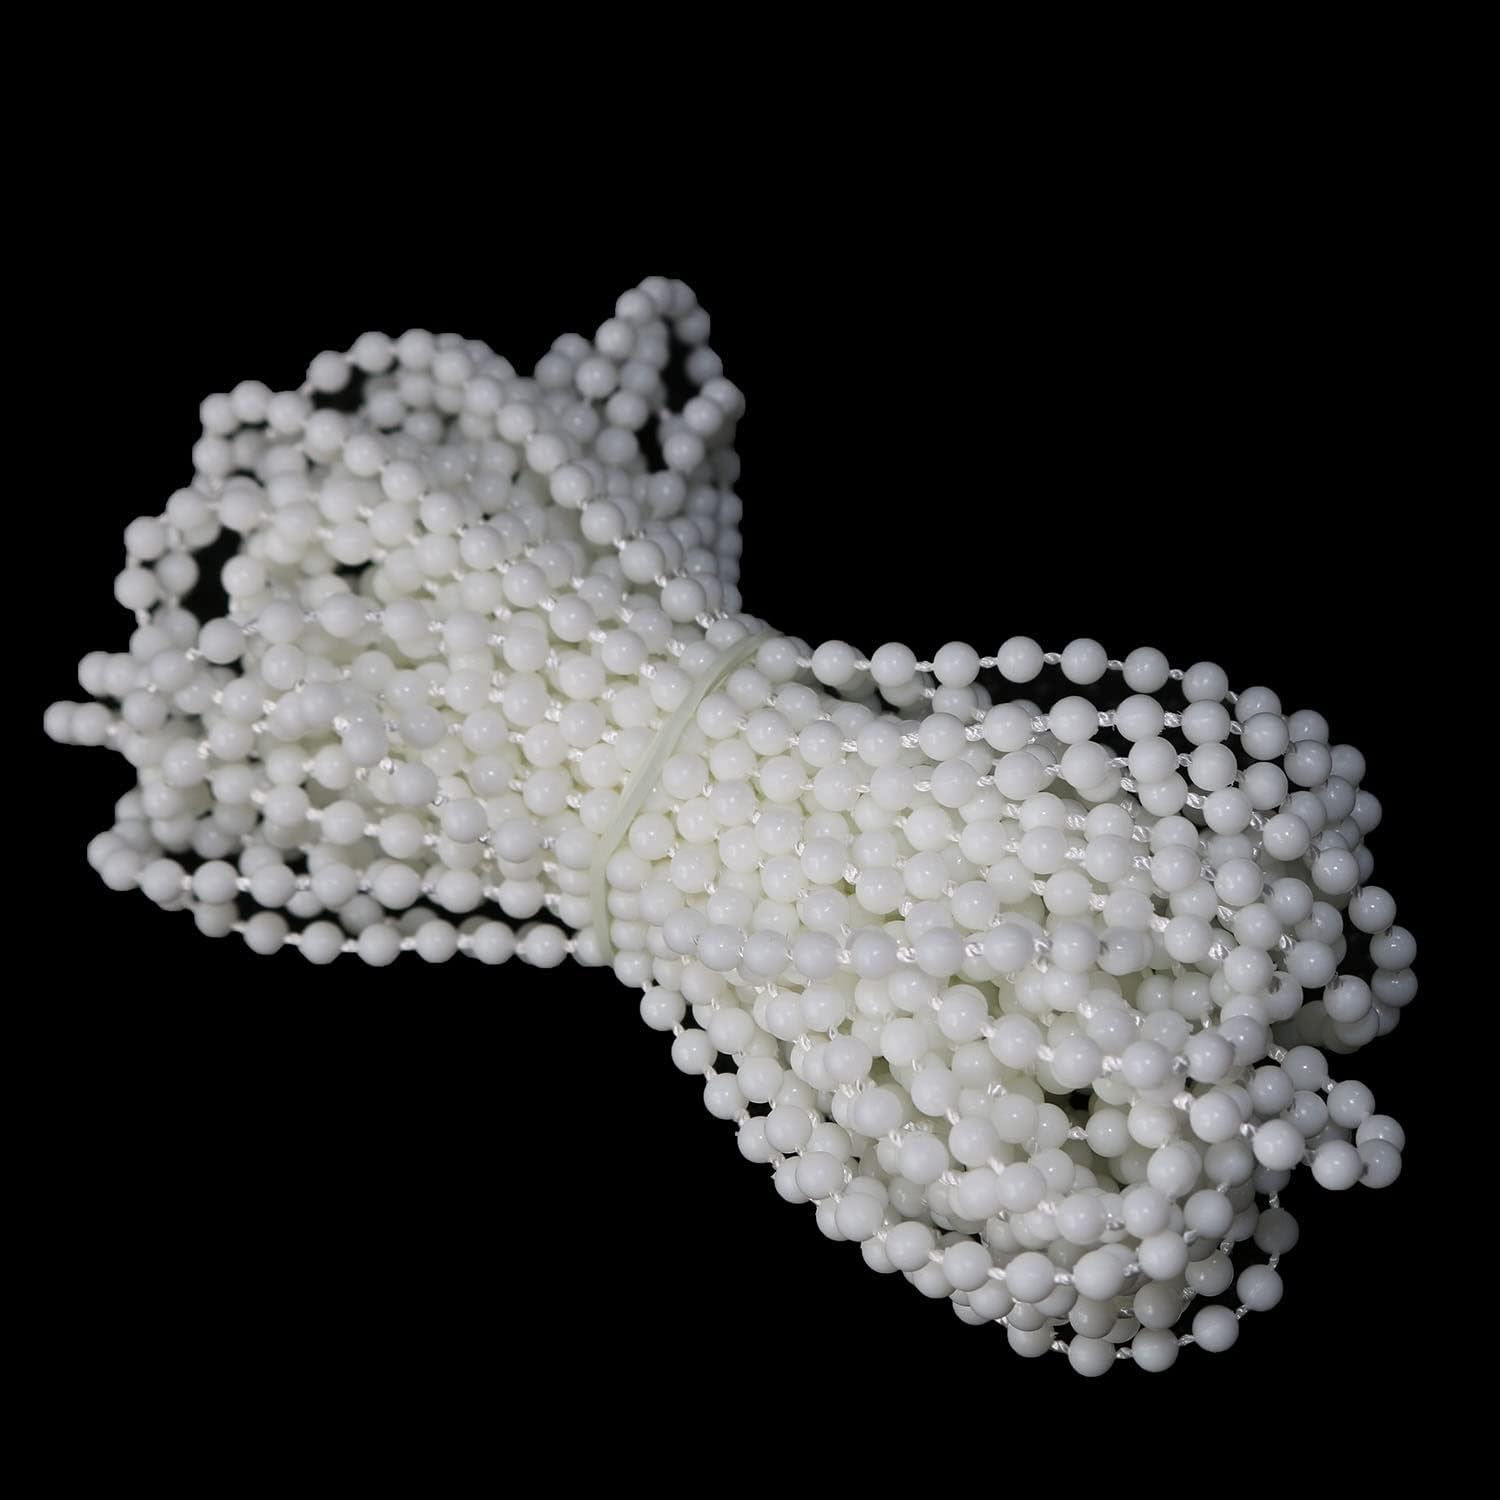 Blinds Pull Bead Chain Repairer Kit 10 Meter 10.94 Yards Plastic Roller Blind Roman Vertical Shade Beaded Chain Pull Cord Window Curtain Beads Rope with 10Pcs Connectors, White